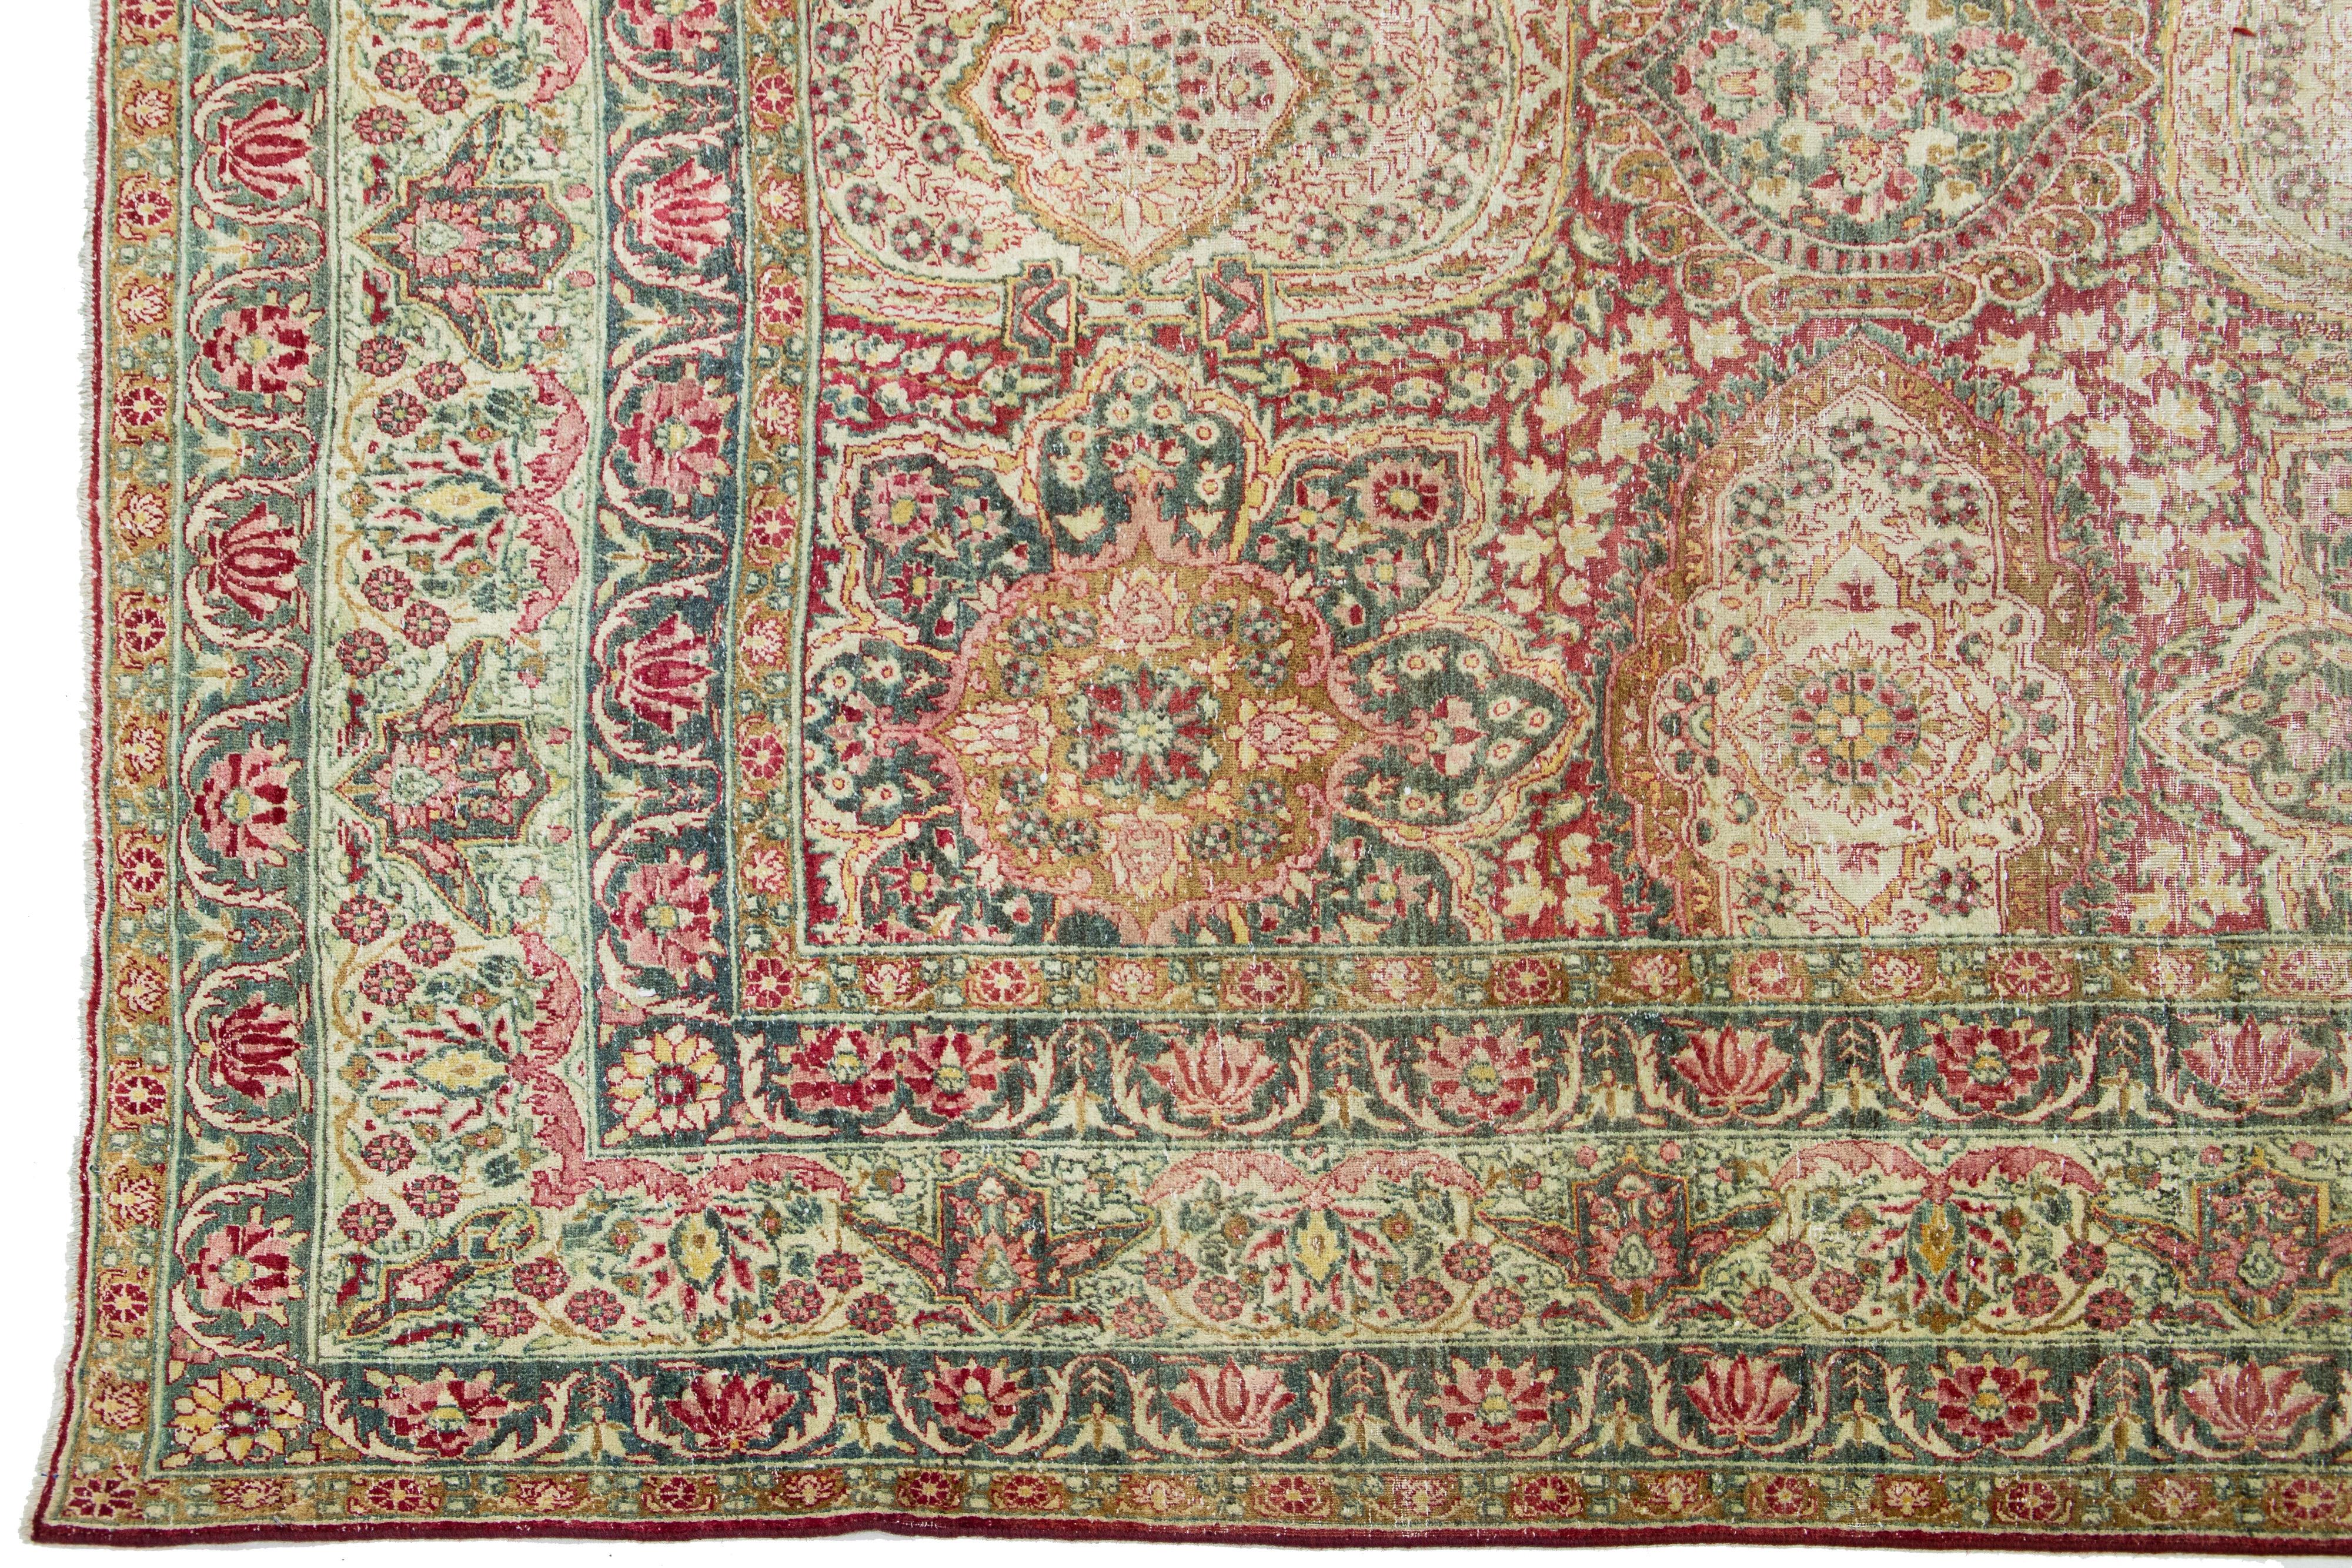 Antique Handmade Wool Rug Persian Kerman with Multicolor Floral Motif In Good Condition For Sale In Norwalk, CT